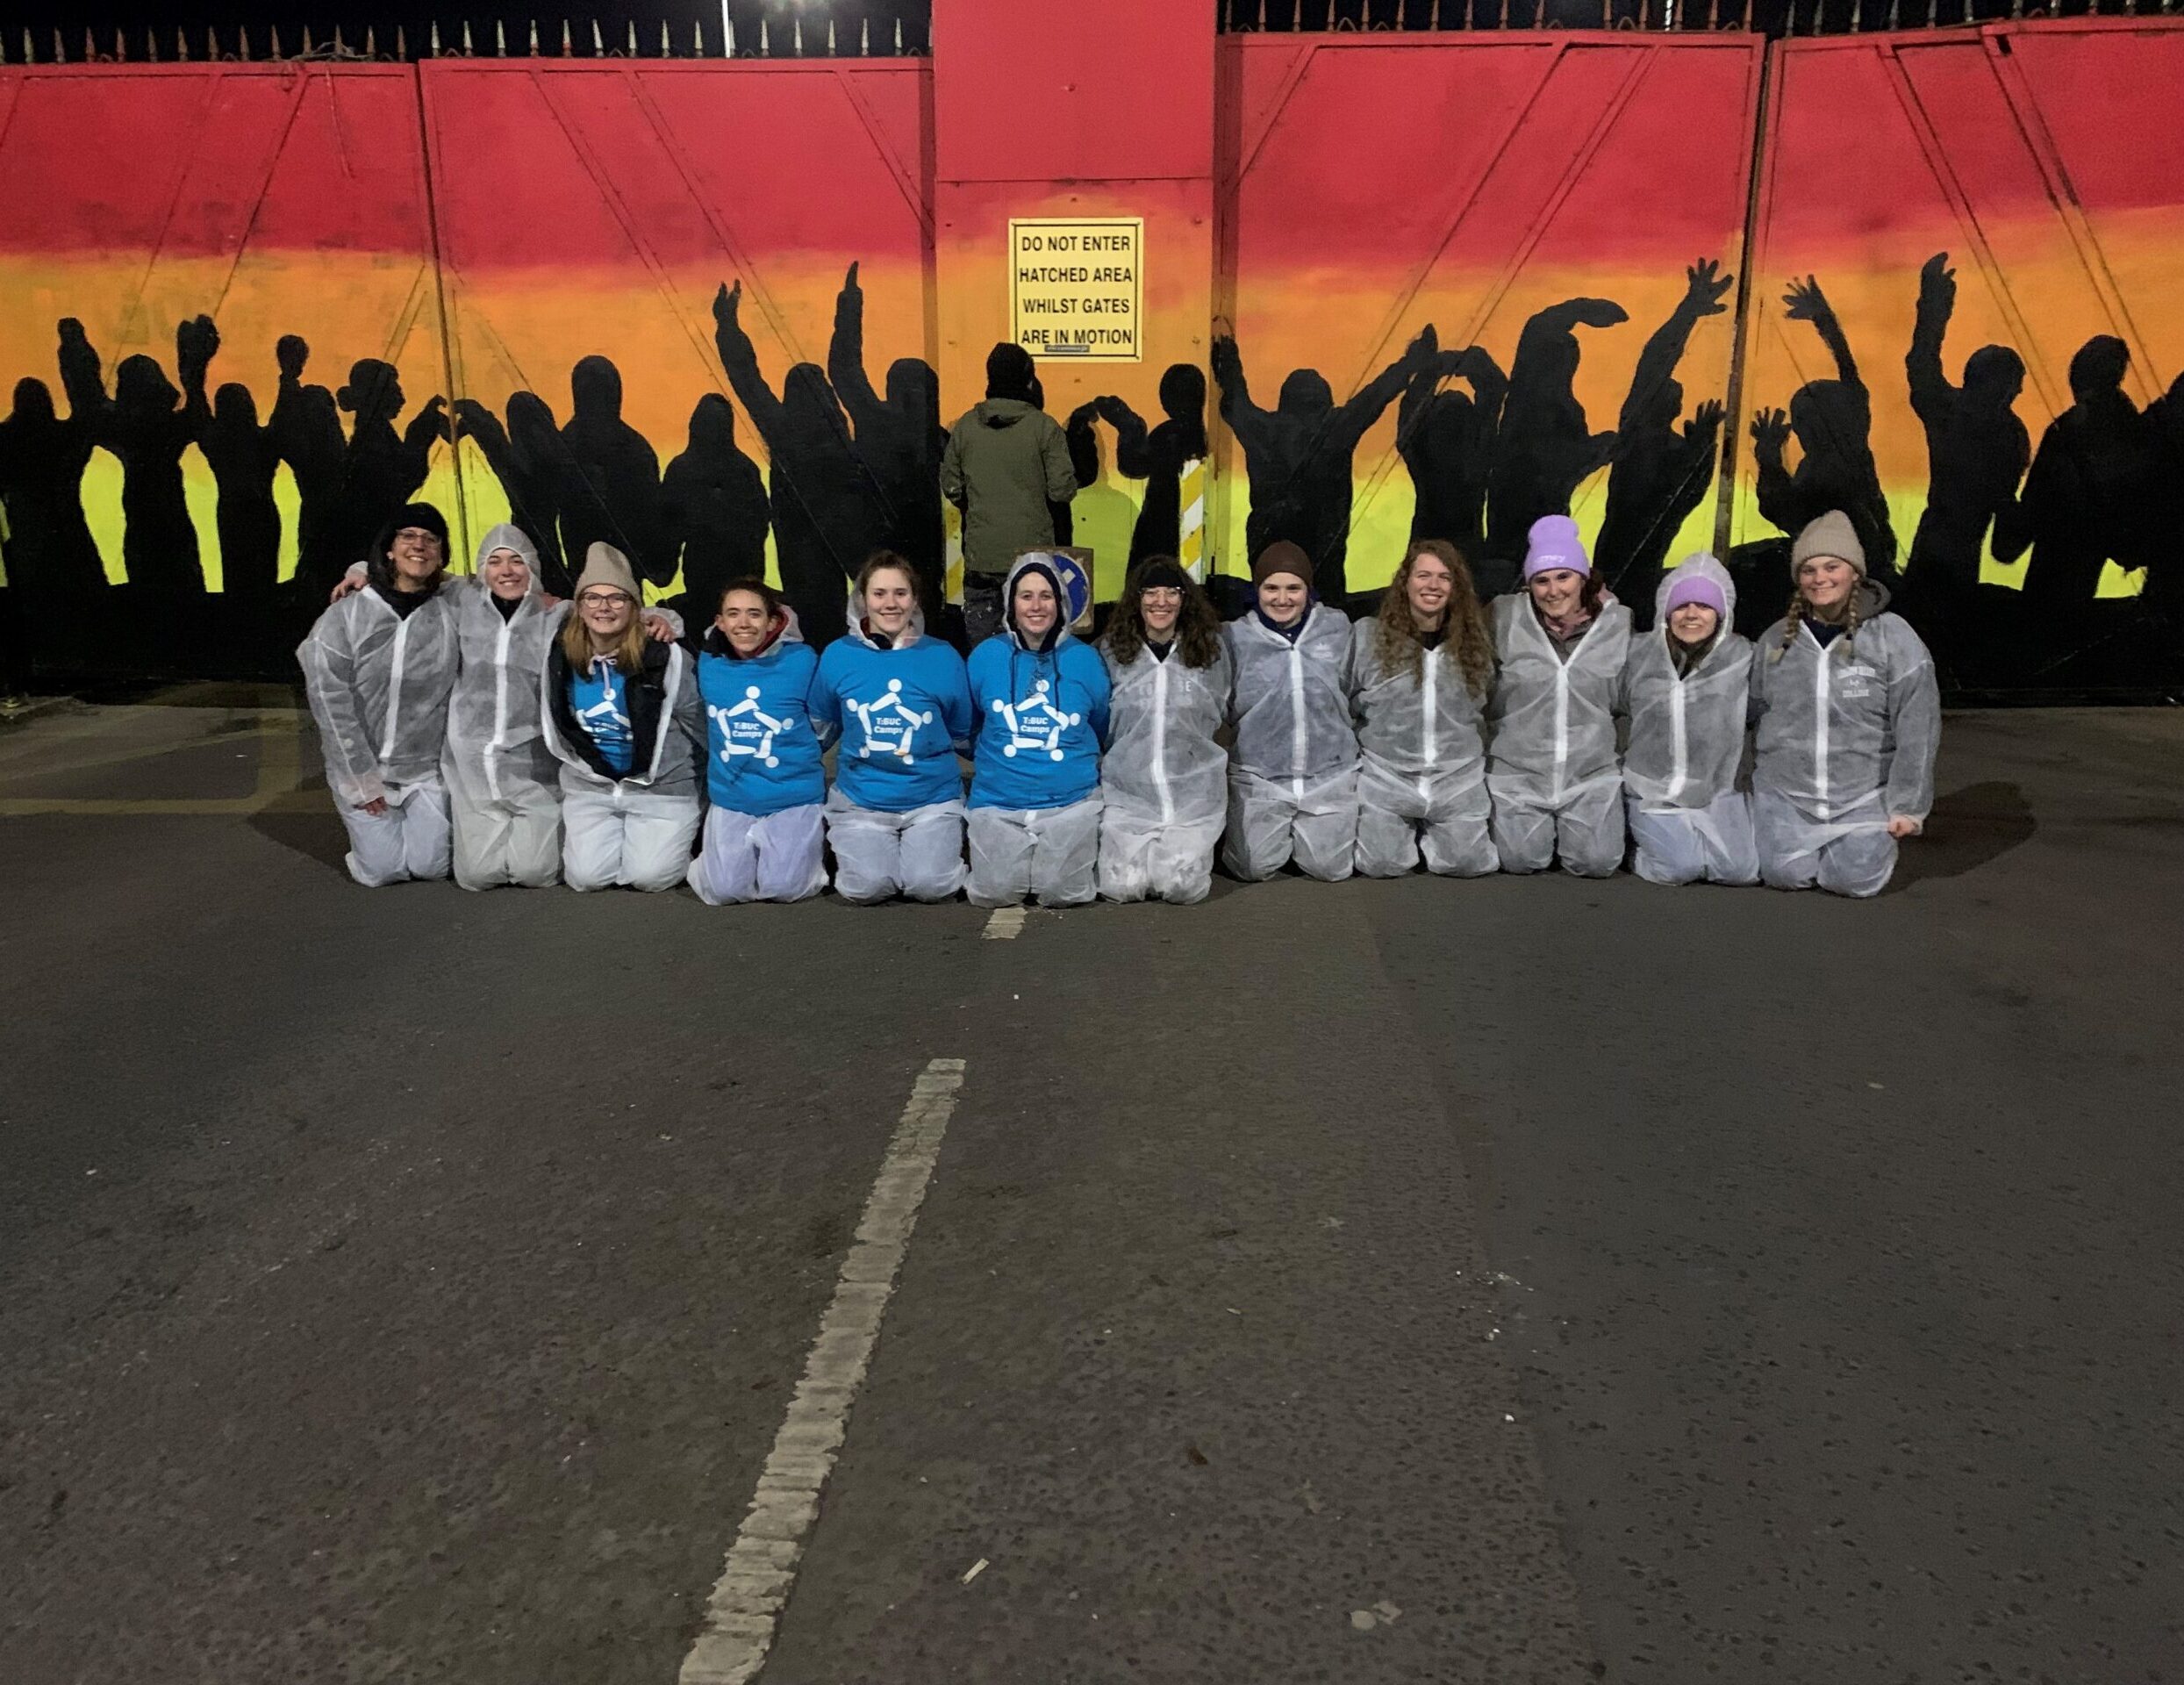 LVC students pose in front of mural during service trip in Northern Ireland.